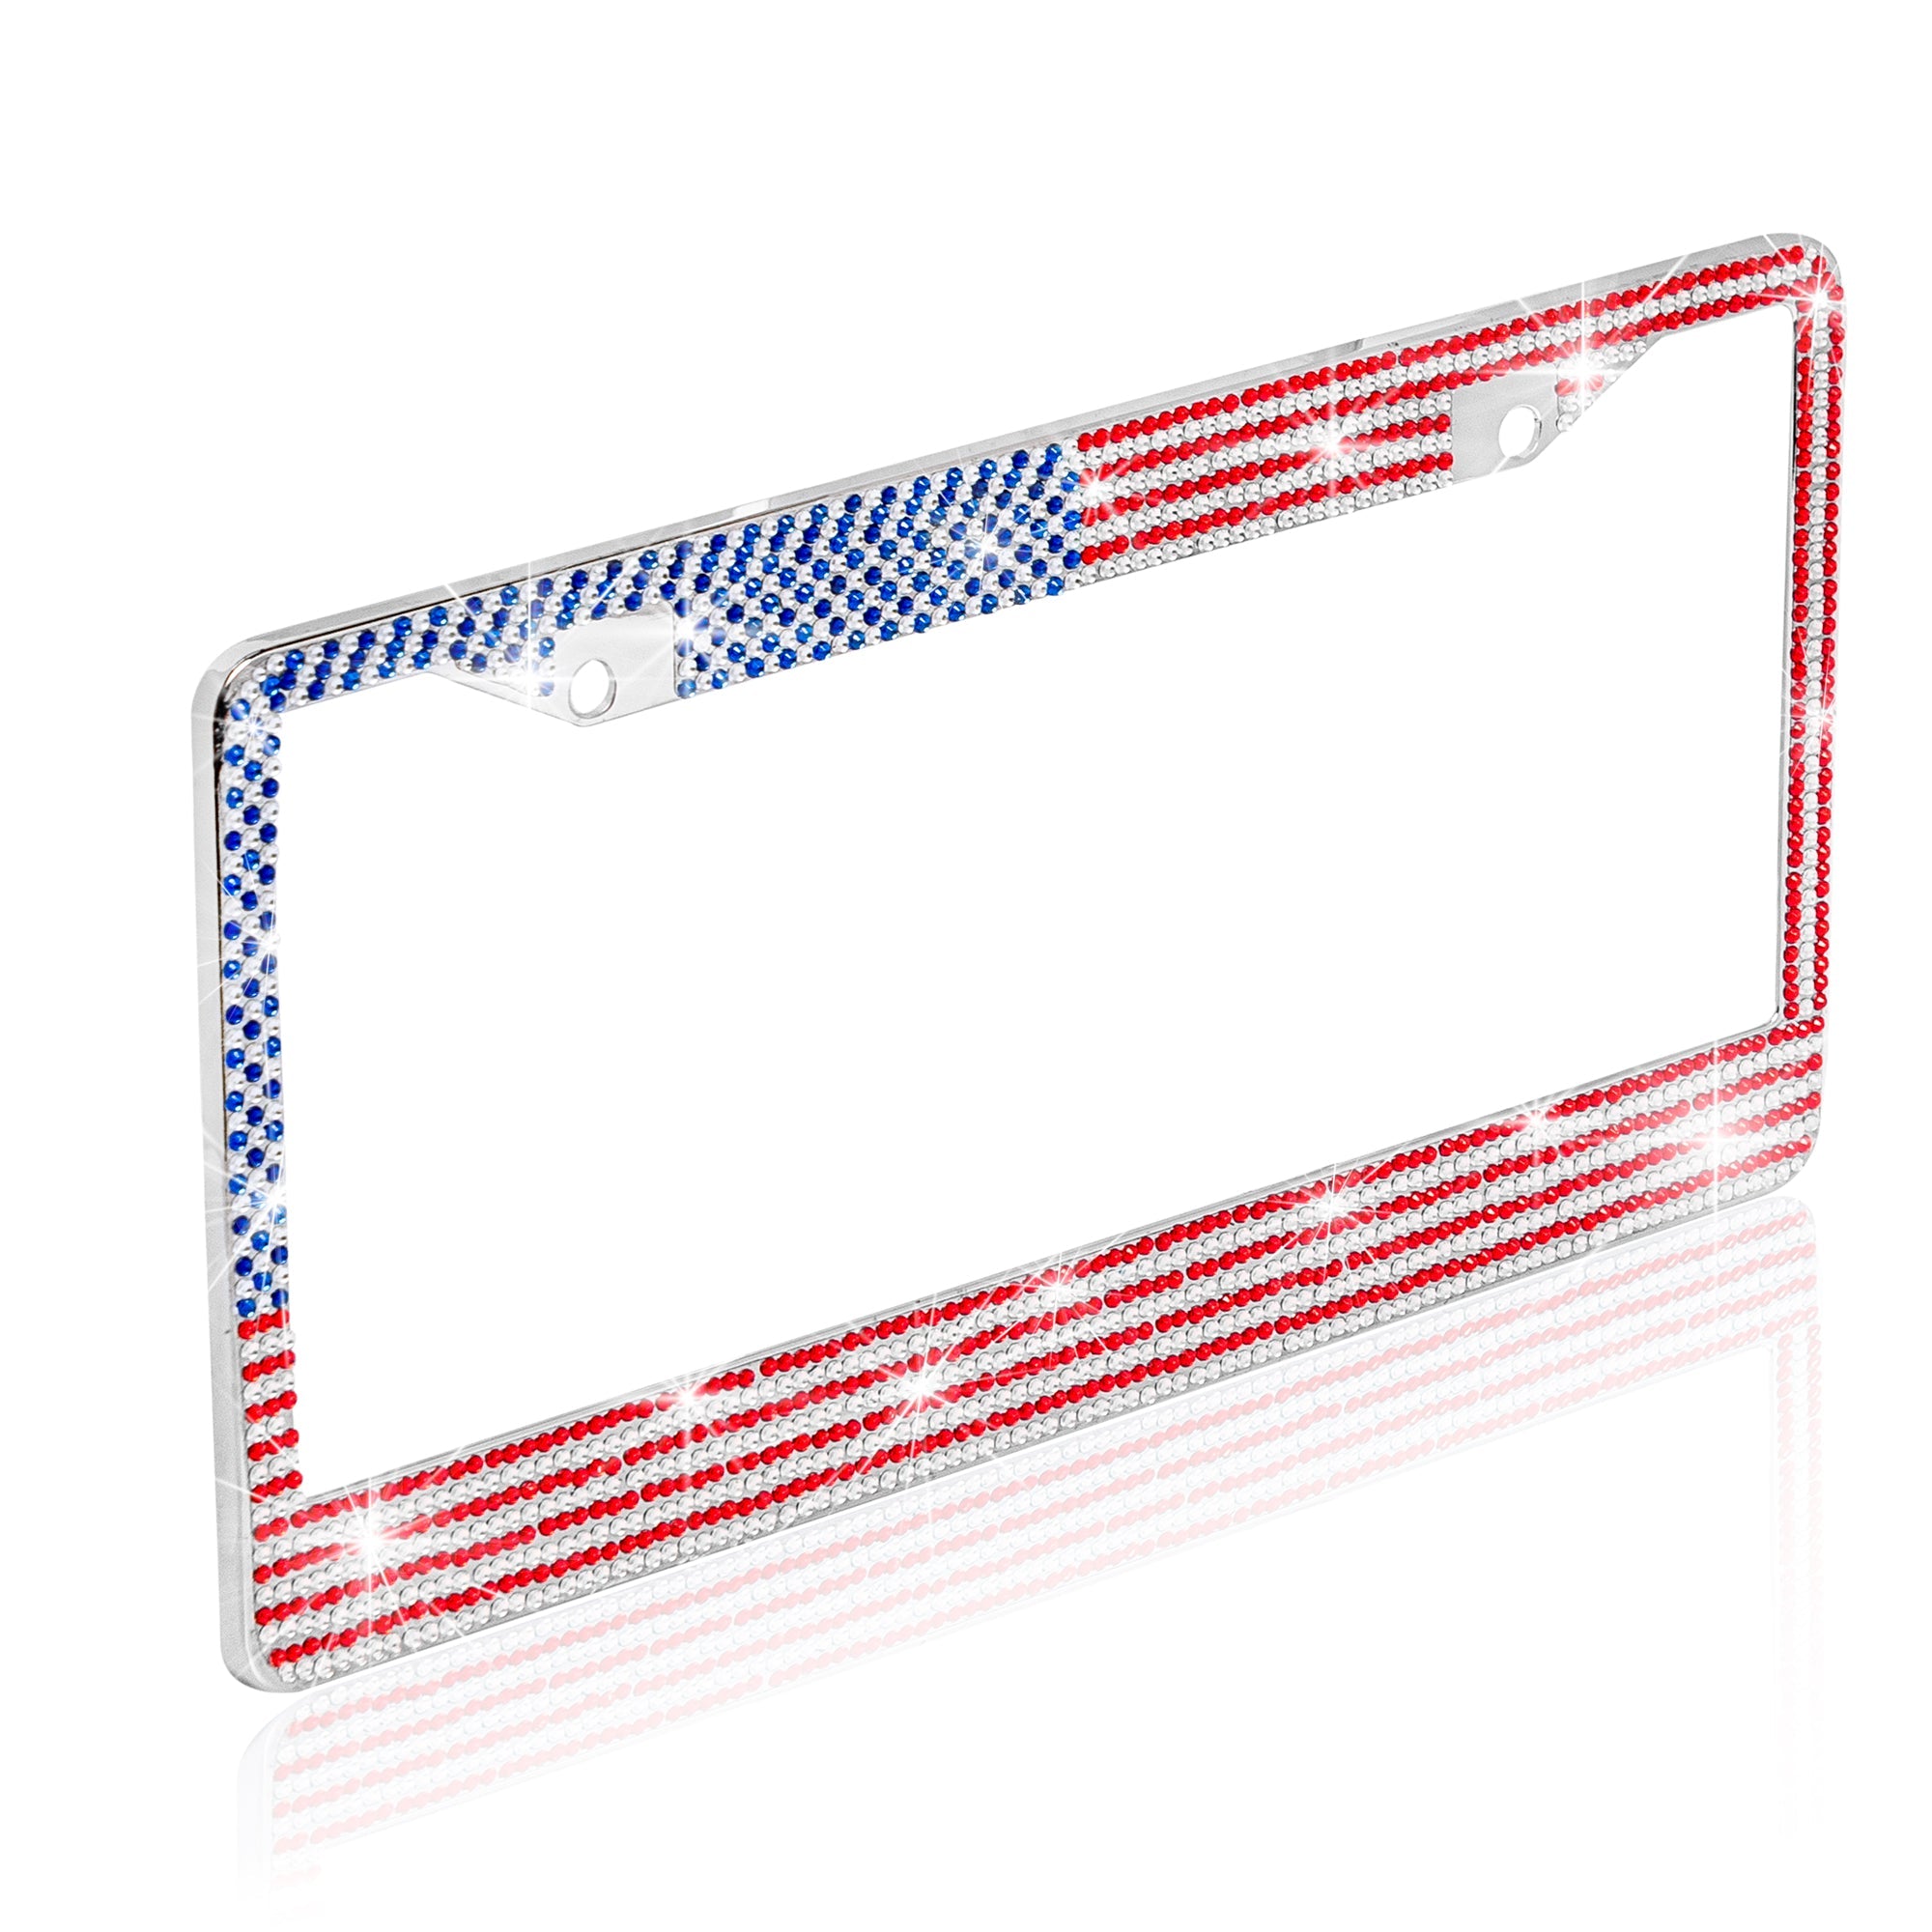 Heavy Duty Rust-Proof Stainless-Steel Metal USA United States Flag Rhinestone Sparkly Sparkling Diamond Crystal Bling License Plate Frame Universal Size for Car Truck SUV (Pack of 2) - 2-Pack